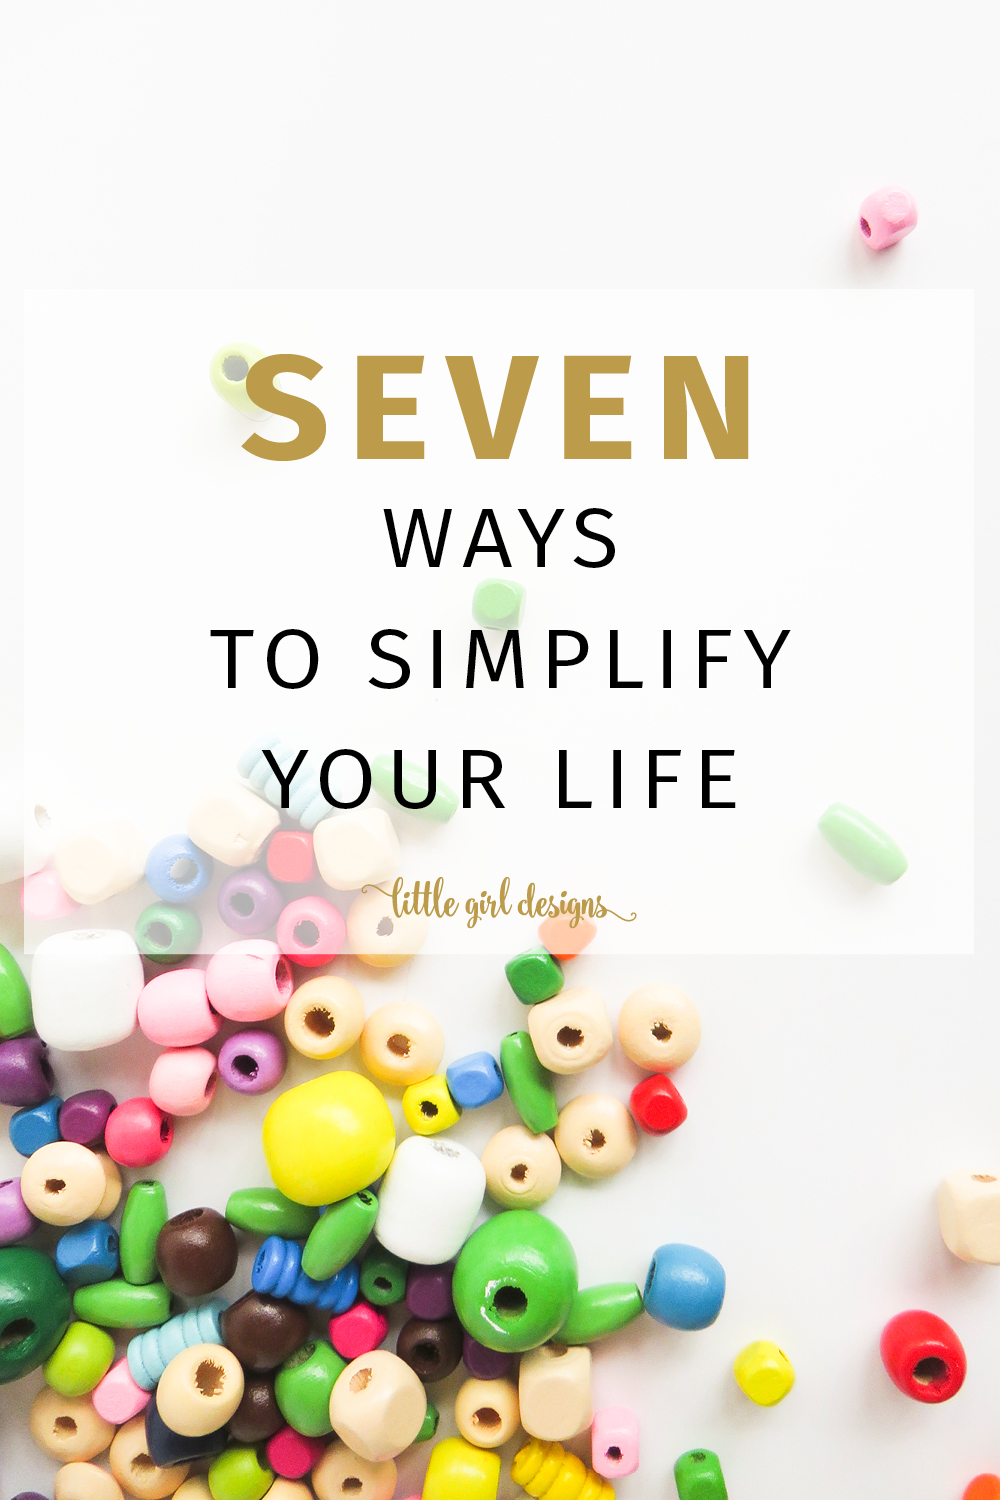 Finally, kid-friendly and real ways to simplify your life! I'm going to work on #1 and #7 this month!